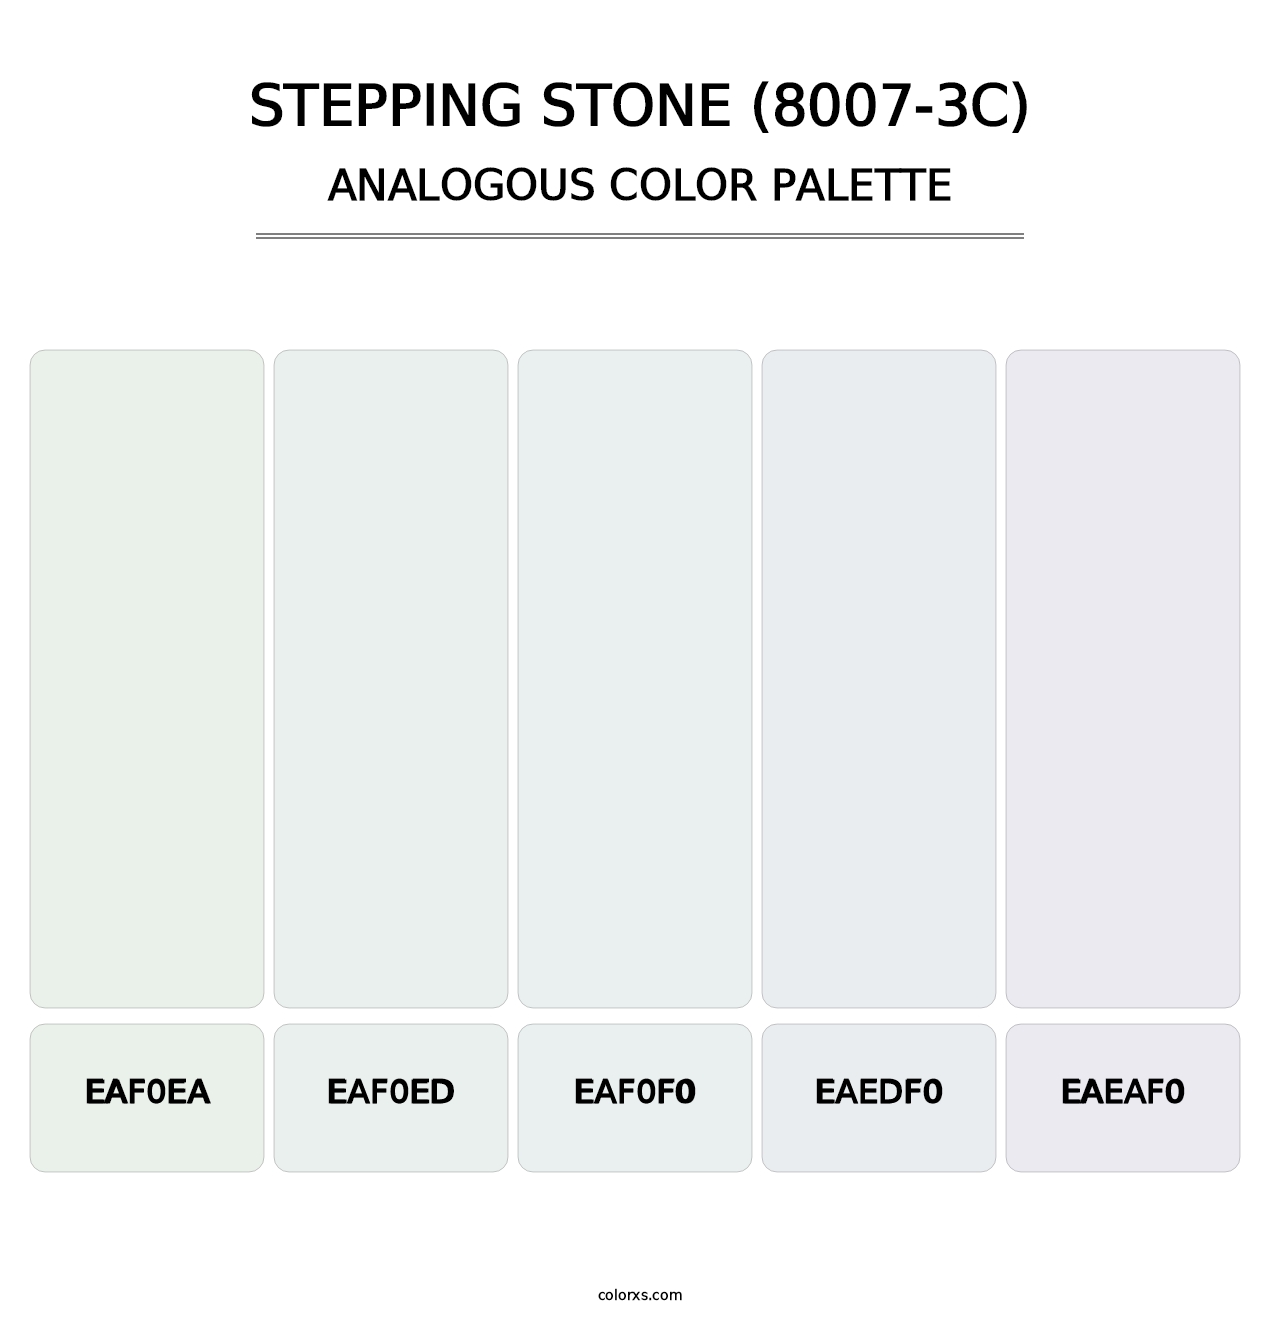 Stepping Stone (8007-3C) - Analogous Color Palette